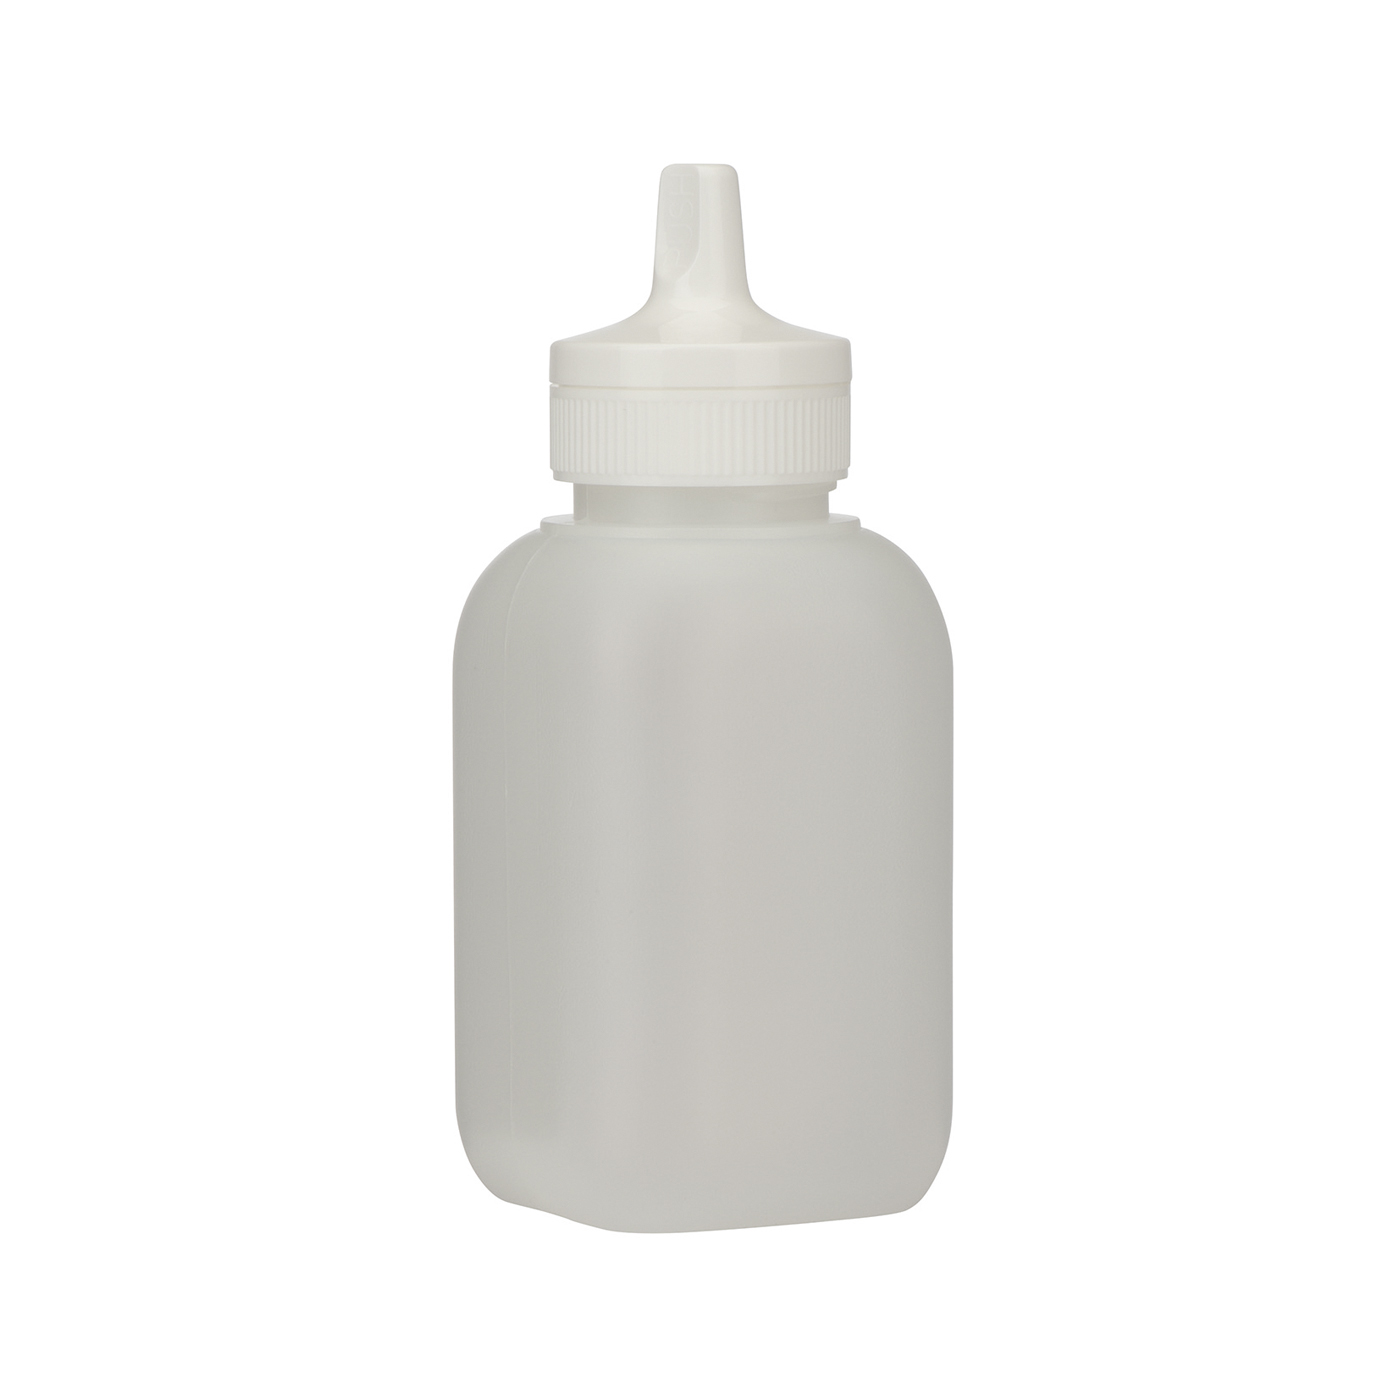 Refill Bottles, for 100 g Powder - 5 pieces